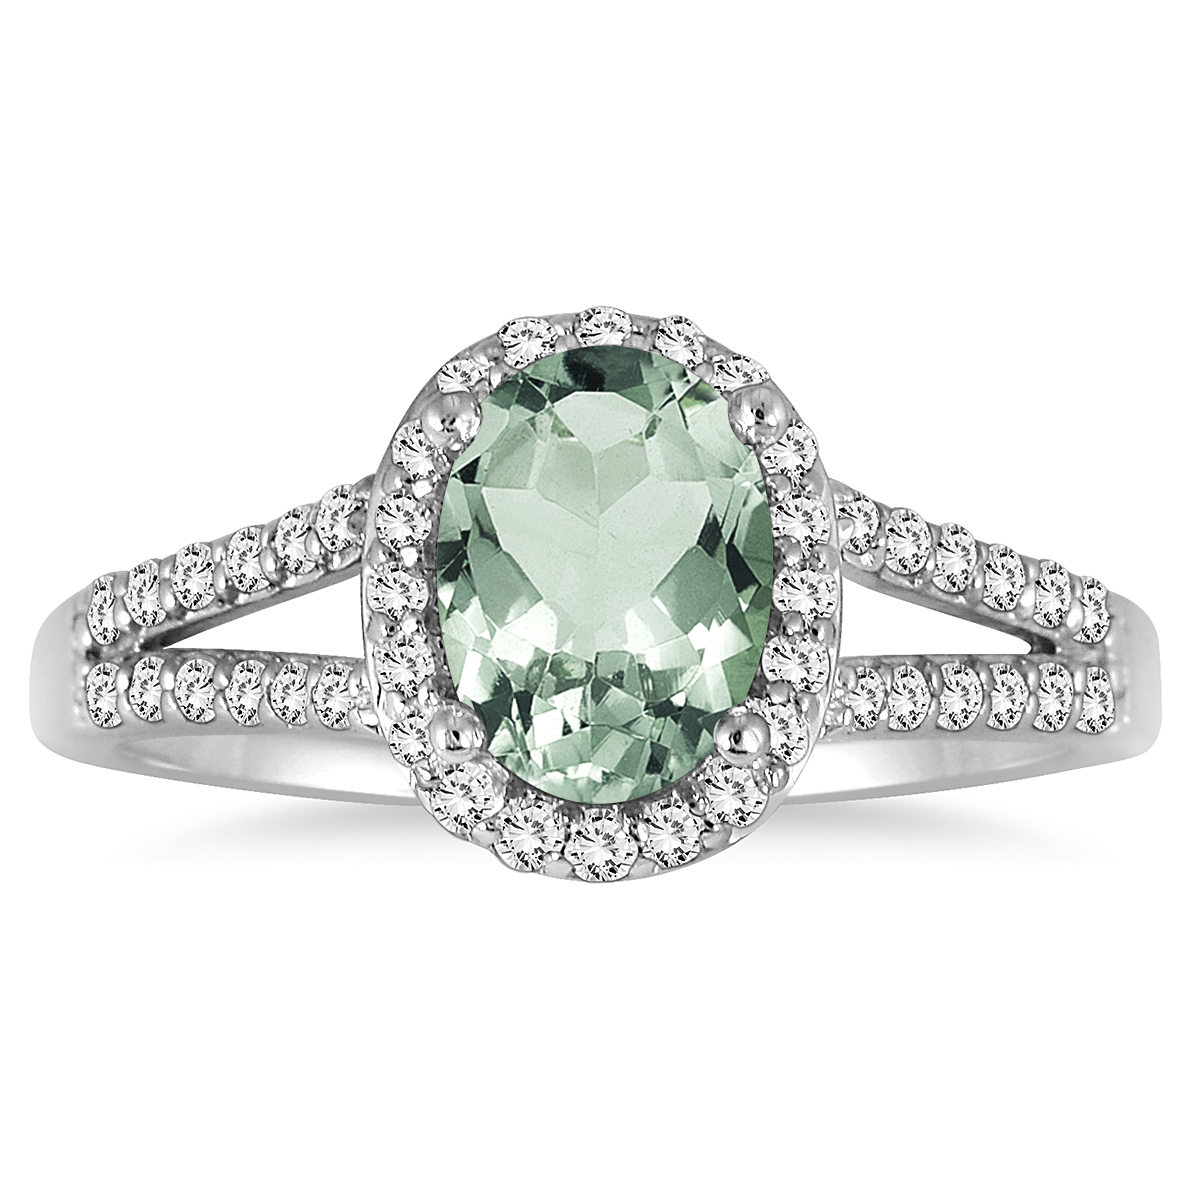 1 1/4 Carat Oval Green Amethyst and Diamond Ring in 10K White Gold